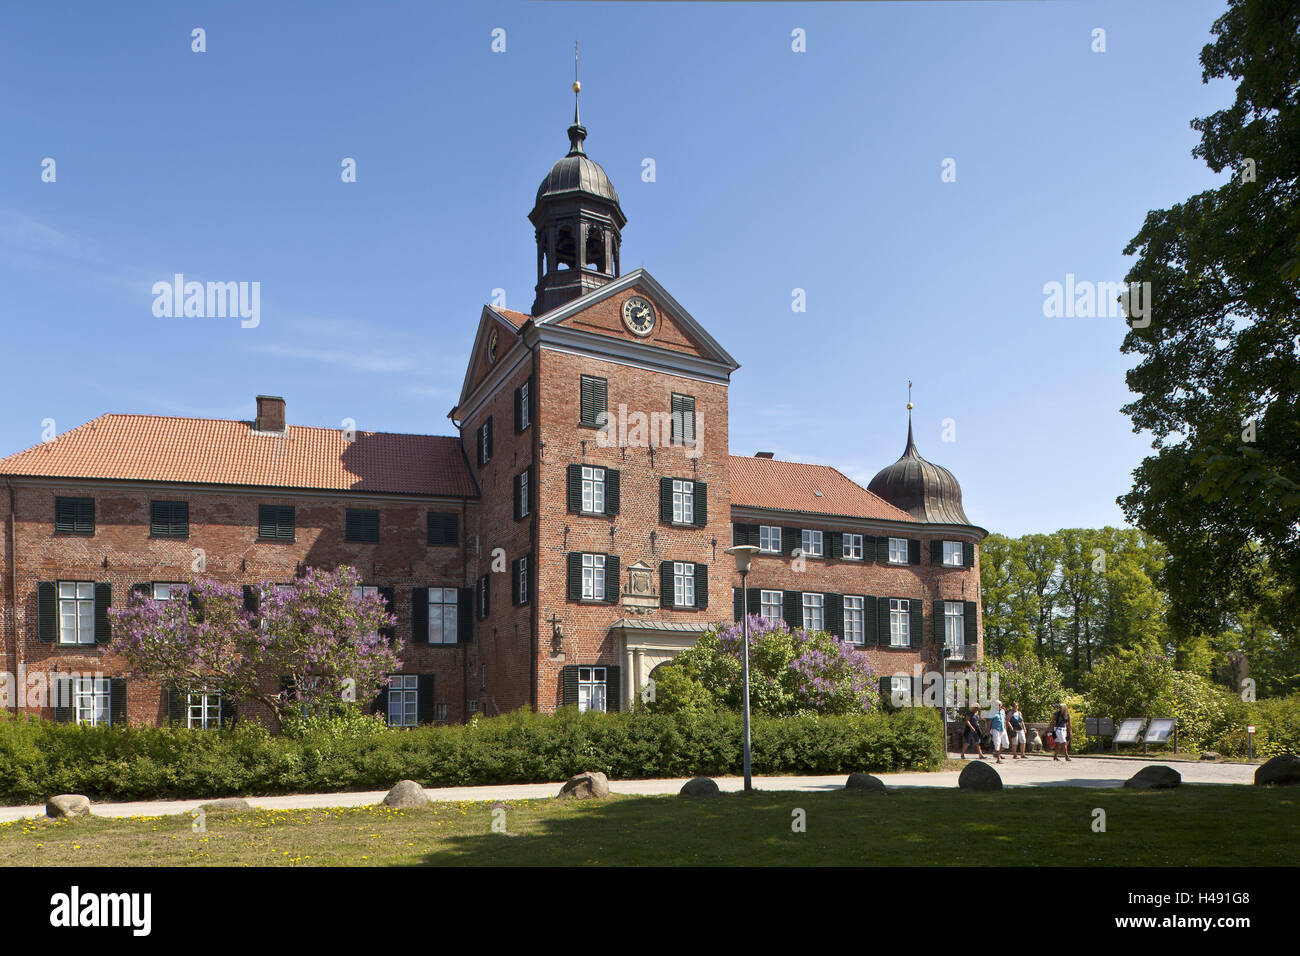 Germany, Schleswig - Holstein, Eutin, lock, outside, tourists, people, Ostholstein, secular building, architectural style, heaven, blue, sunshine, town, architecture, building, bricks, brick buildings, clock, Stock Photo